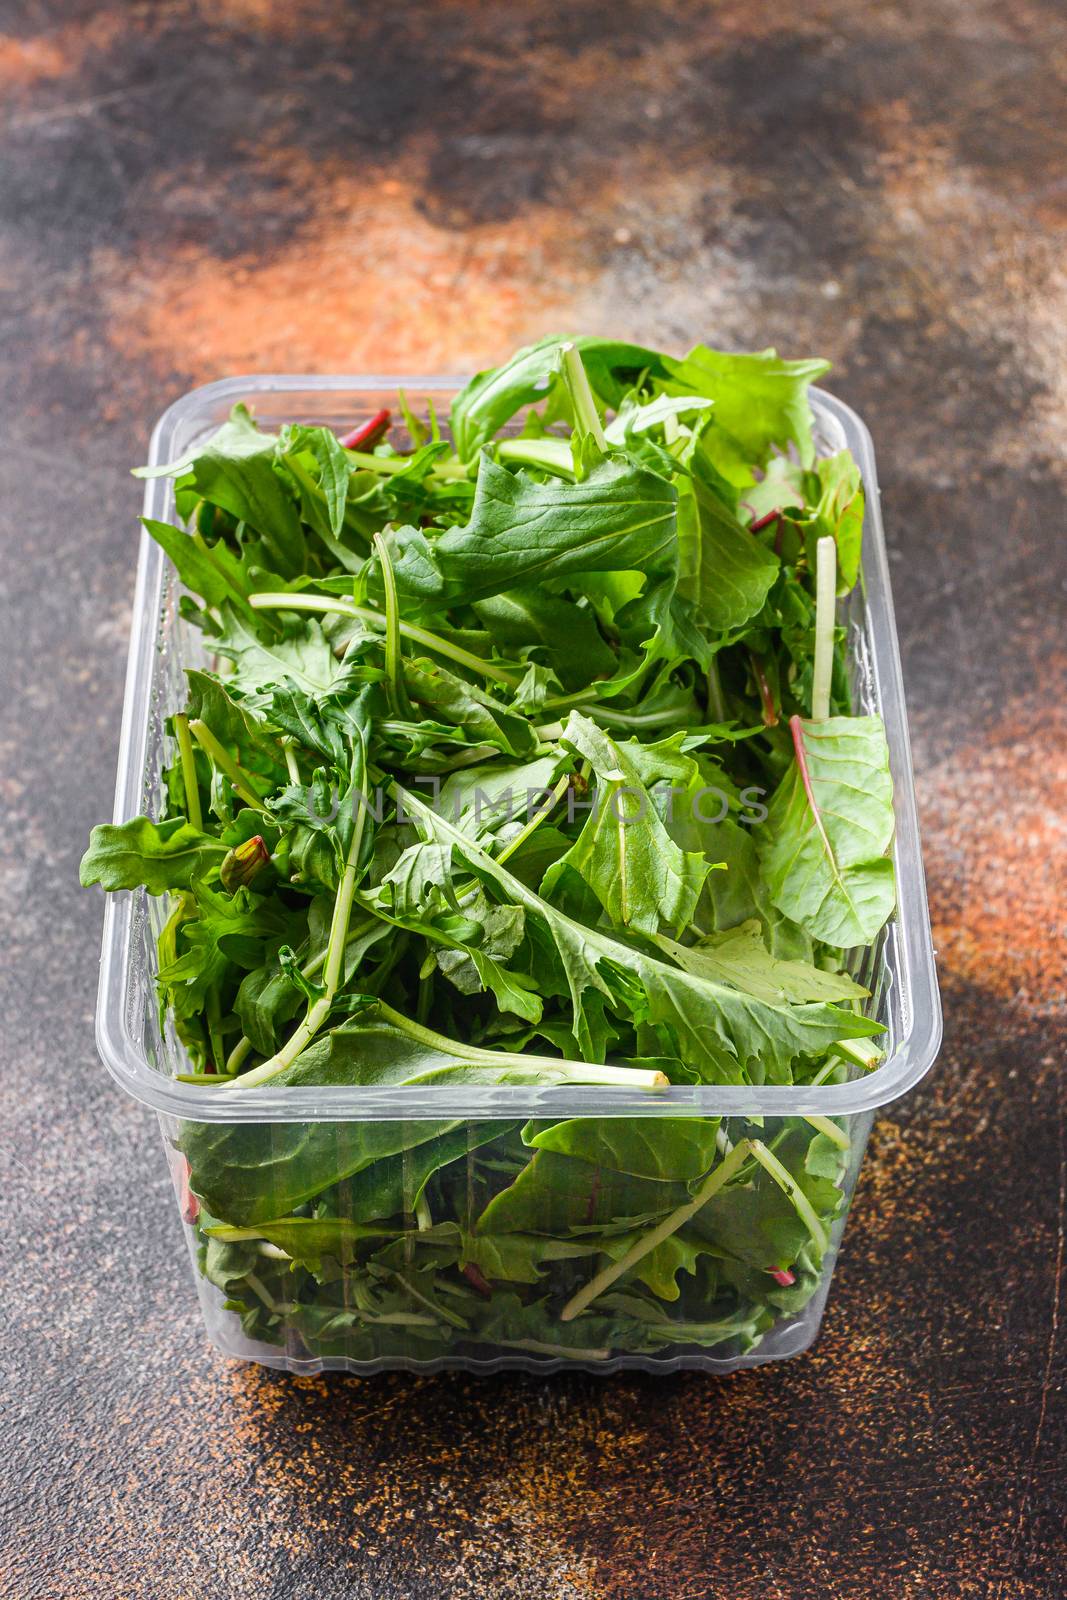 Organic Arugula Chard and Mizuna salad mix in plastic container side view